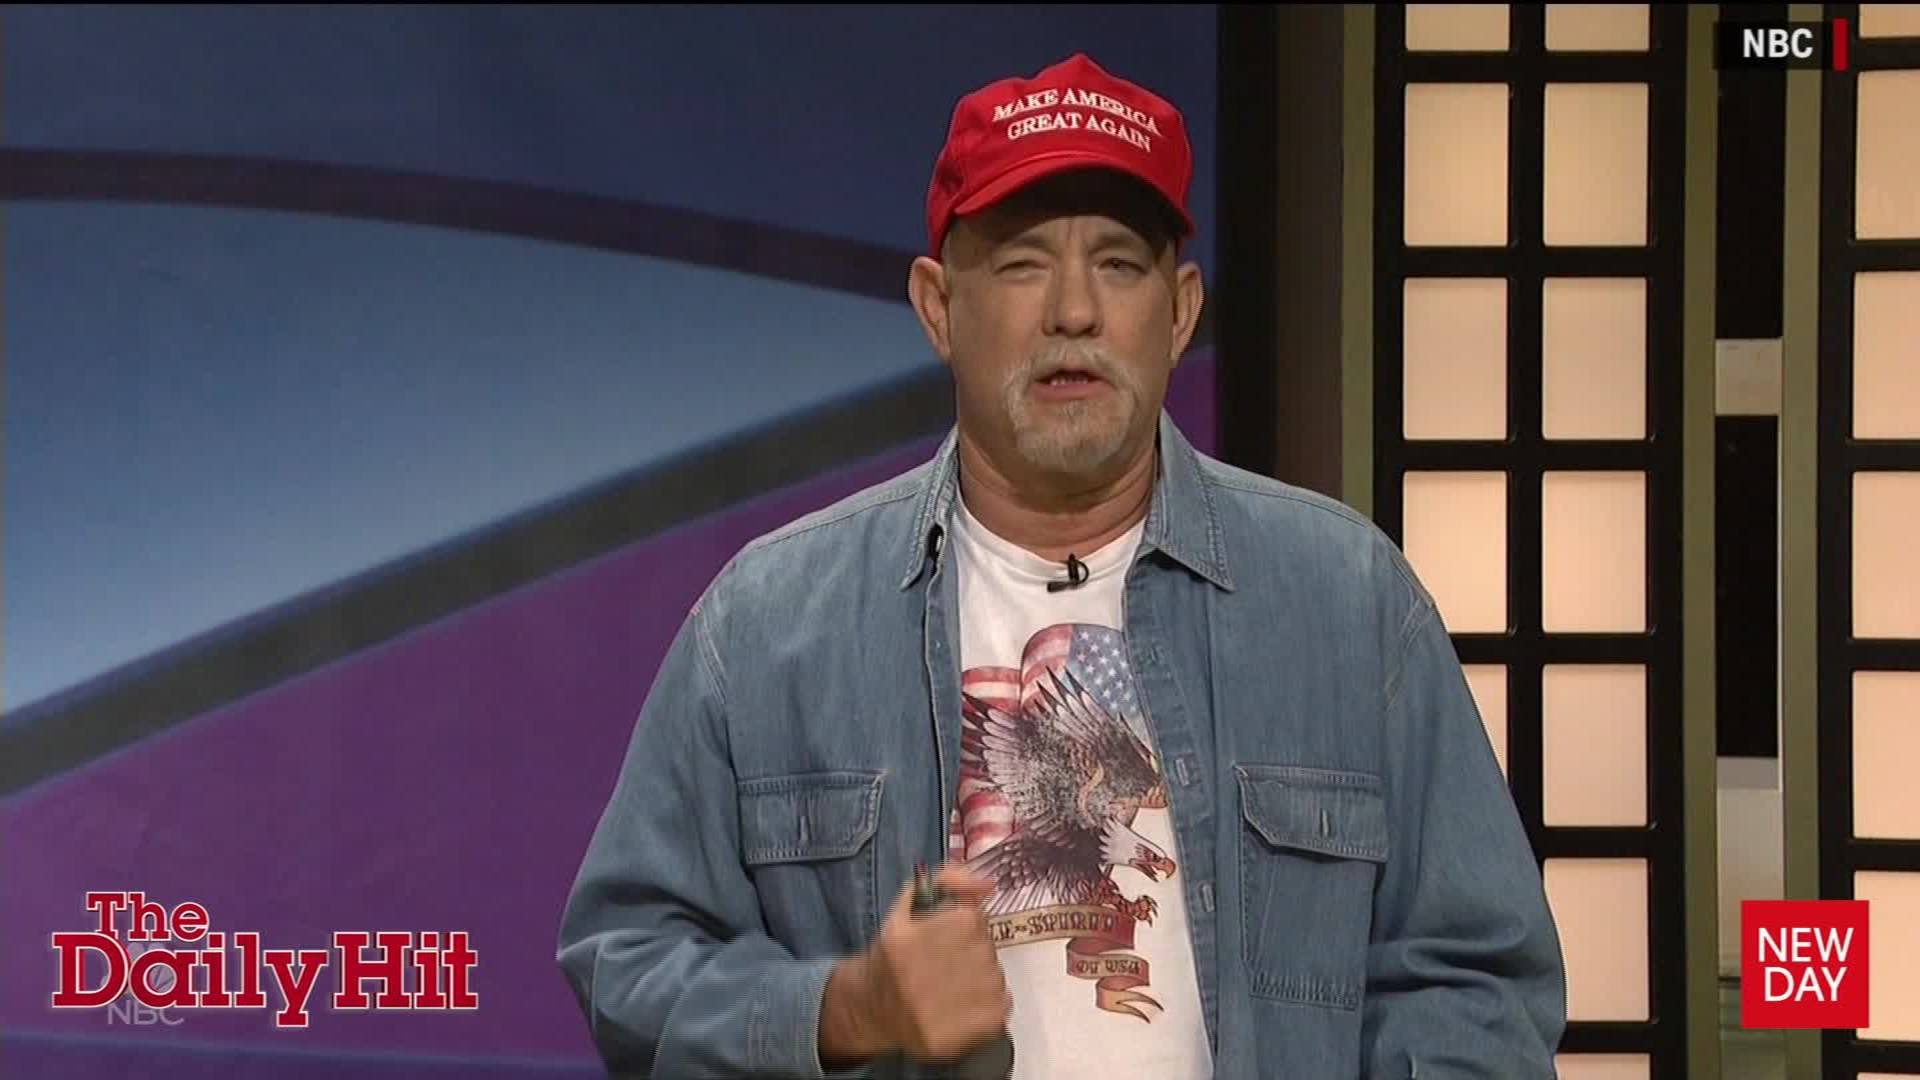 Brise At læse Foresee Hanks plays Trump supporter on 'Black Jeopardy' | CNN